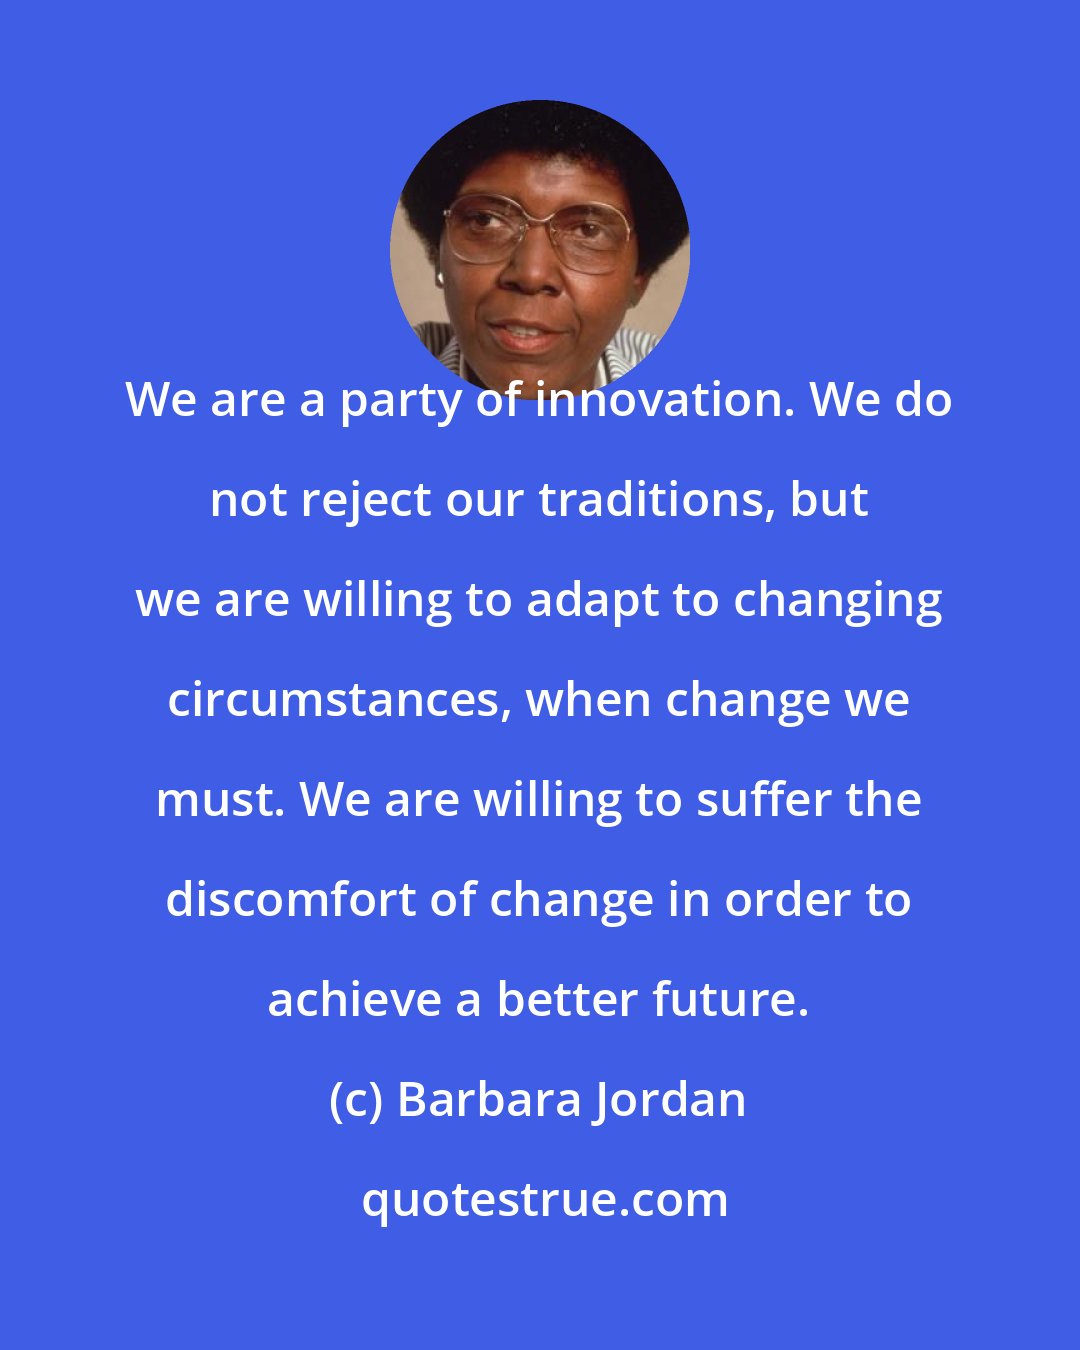 Barbara Jordan: We are a party of innovation. We do not reject our traditions, but we are willing to adapt to changing circumstances, when change we must. We are willing to suffer the discomfort of change in order to achieve a better future.